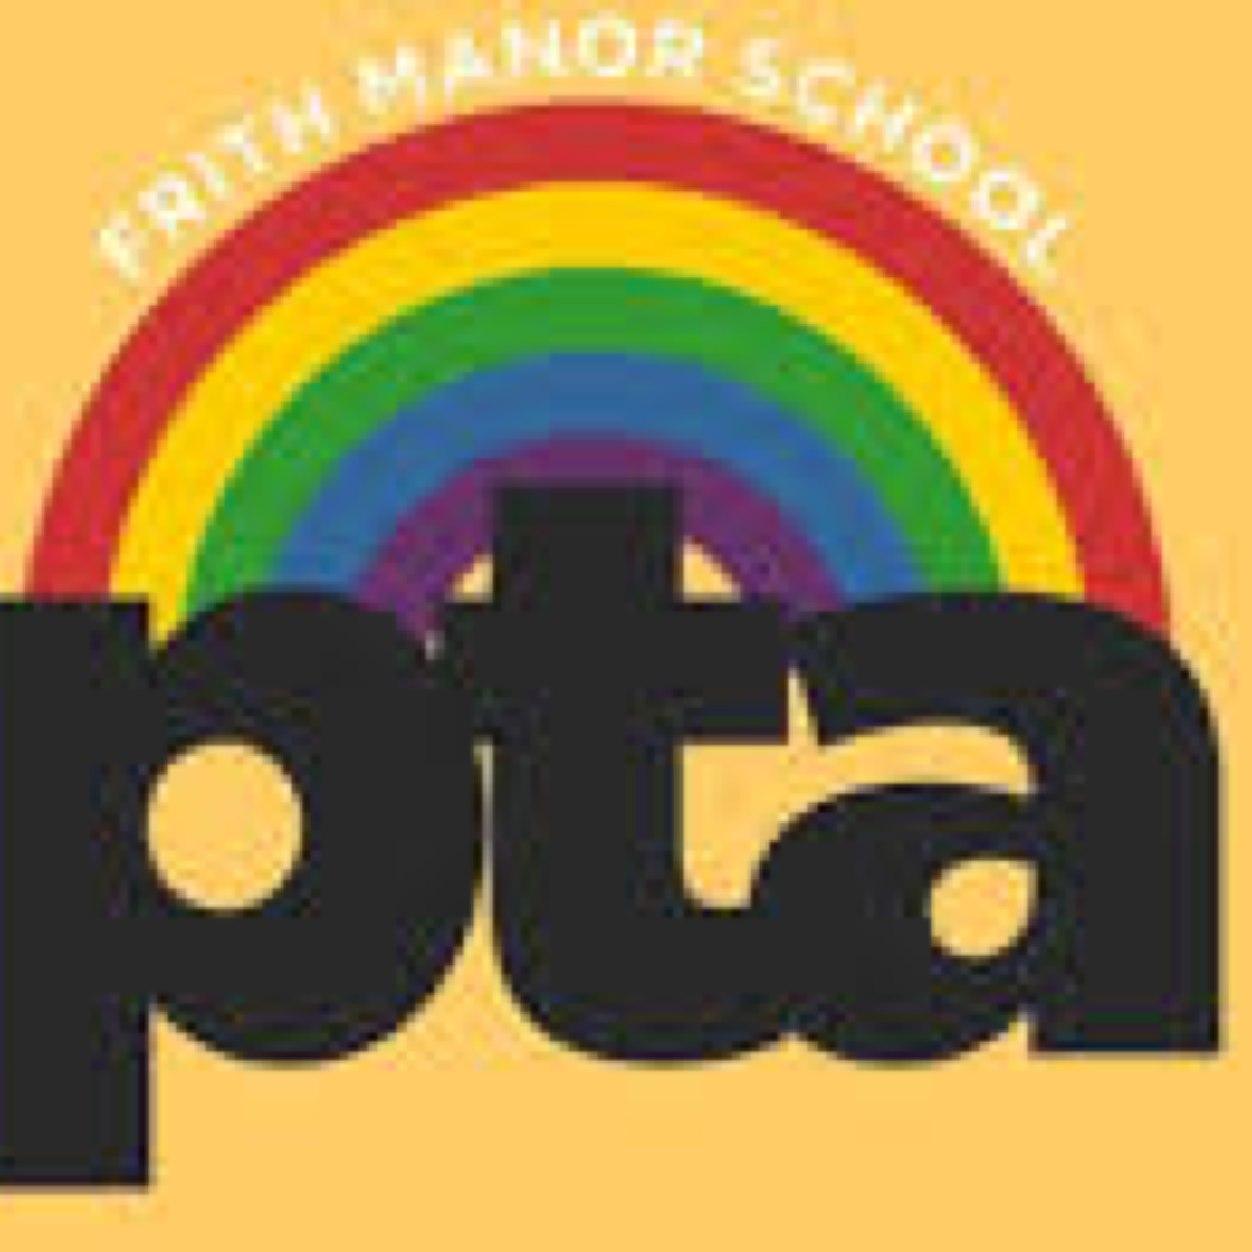 Frith Manor Primary School’s PTA, raising funds to support our children frithpta@gmail.com #frithmanor_n12 https://t.co/6yZaOnc9S5